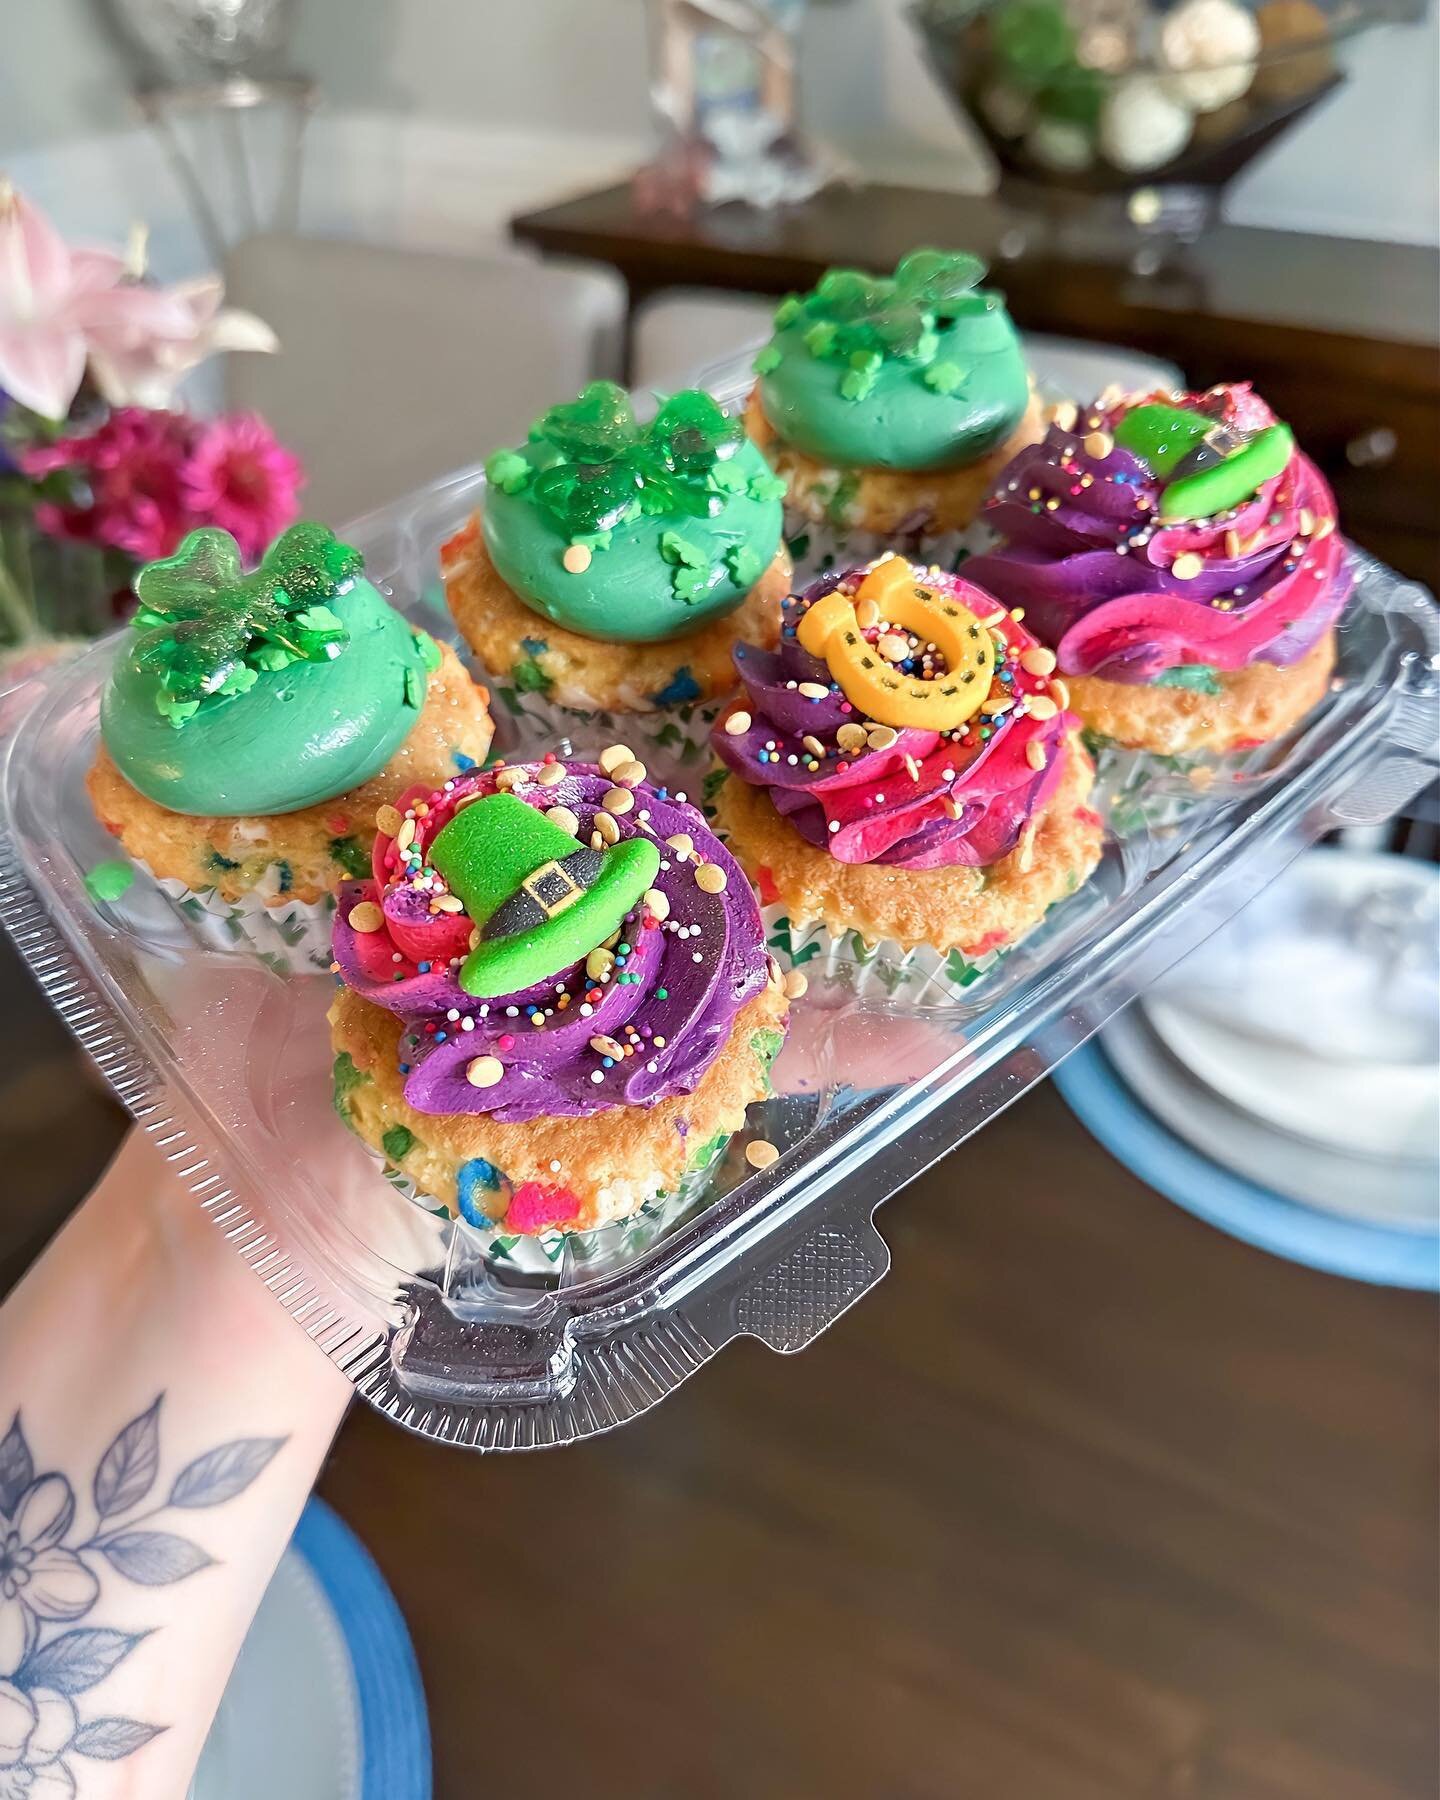 Saint Patrick&rsquo;s Day may be over but that doesn&rsquo;t mean you can&rsquo;t have some Irish luck!🇮🇪🍀If your looking for custom cupcakes click the order form link in our bio🥳🧁
&bull;
&bull;
&bull;
#cupcakes #bakery #longislandbakery #baker 